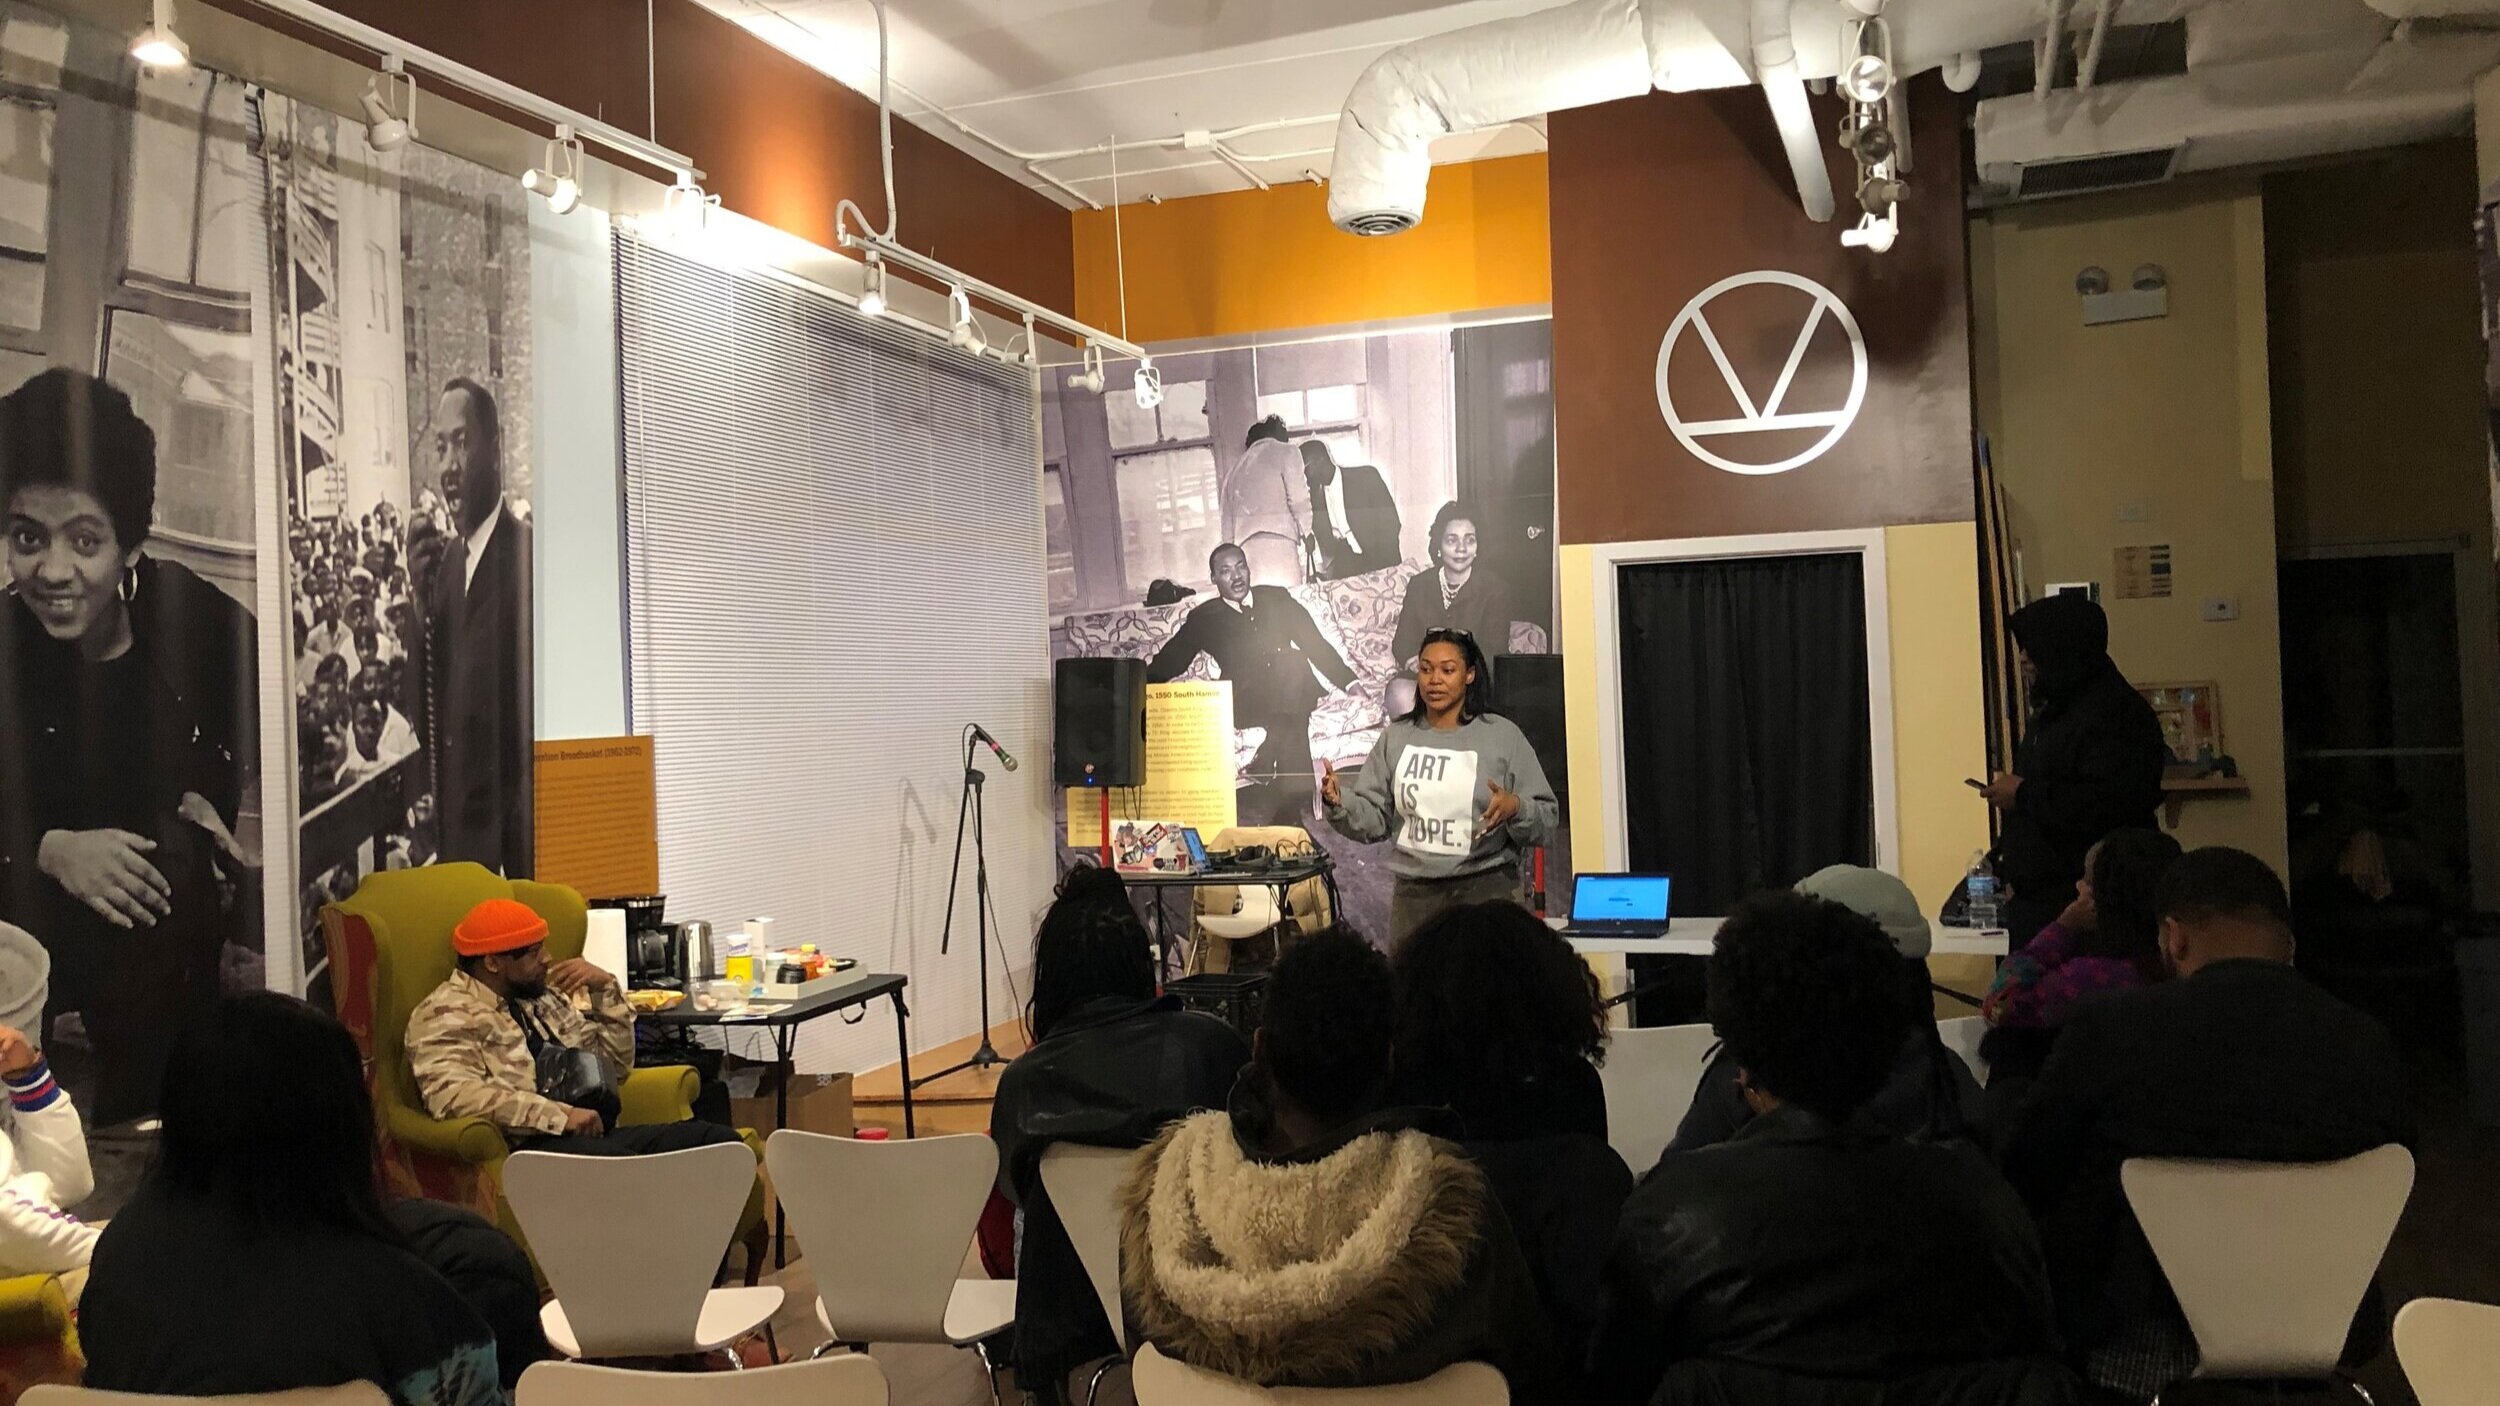   As the event wrapped, MLK Exhibit Center Director Alexie Young stressed the importance of unity and Dr. King’s legacy, especially when organizing for future events. 